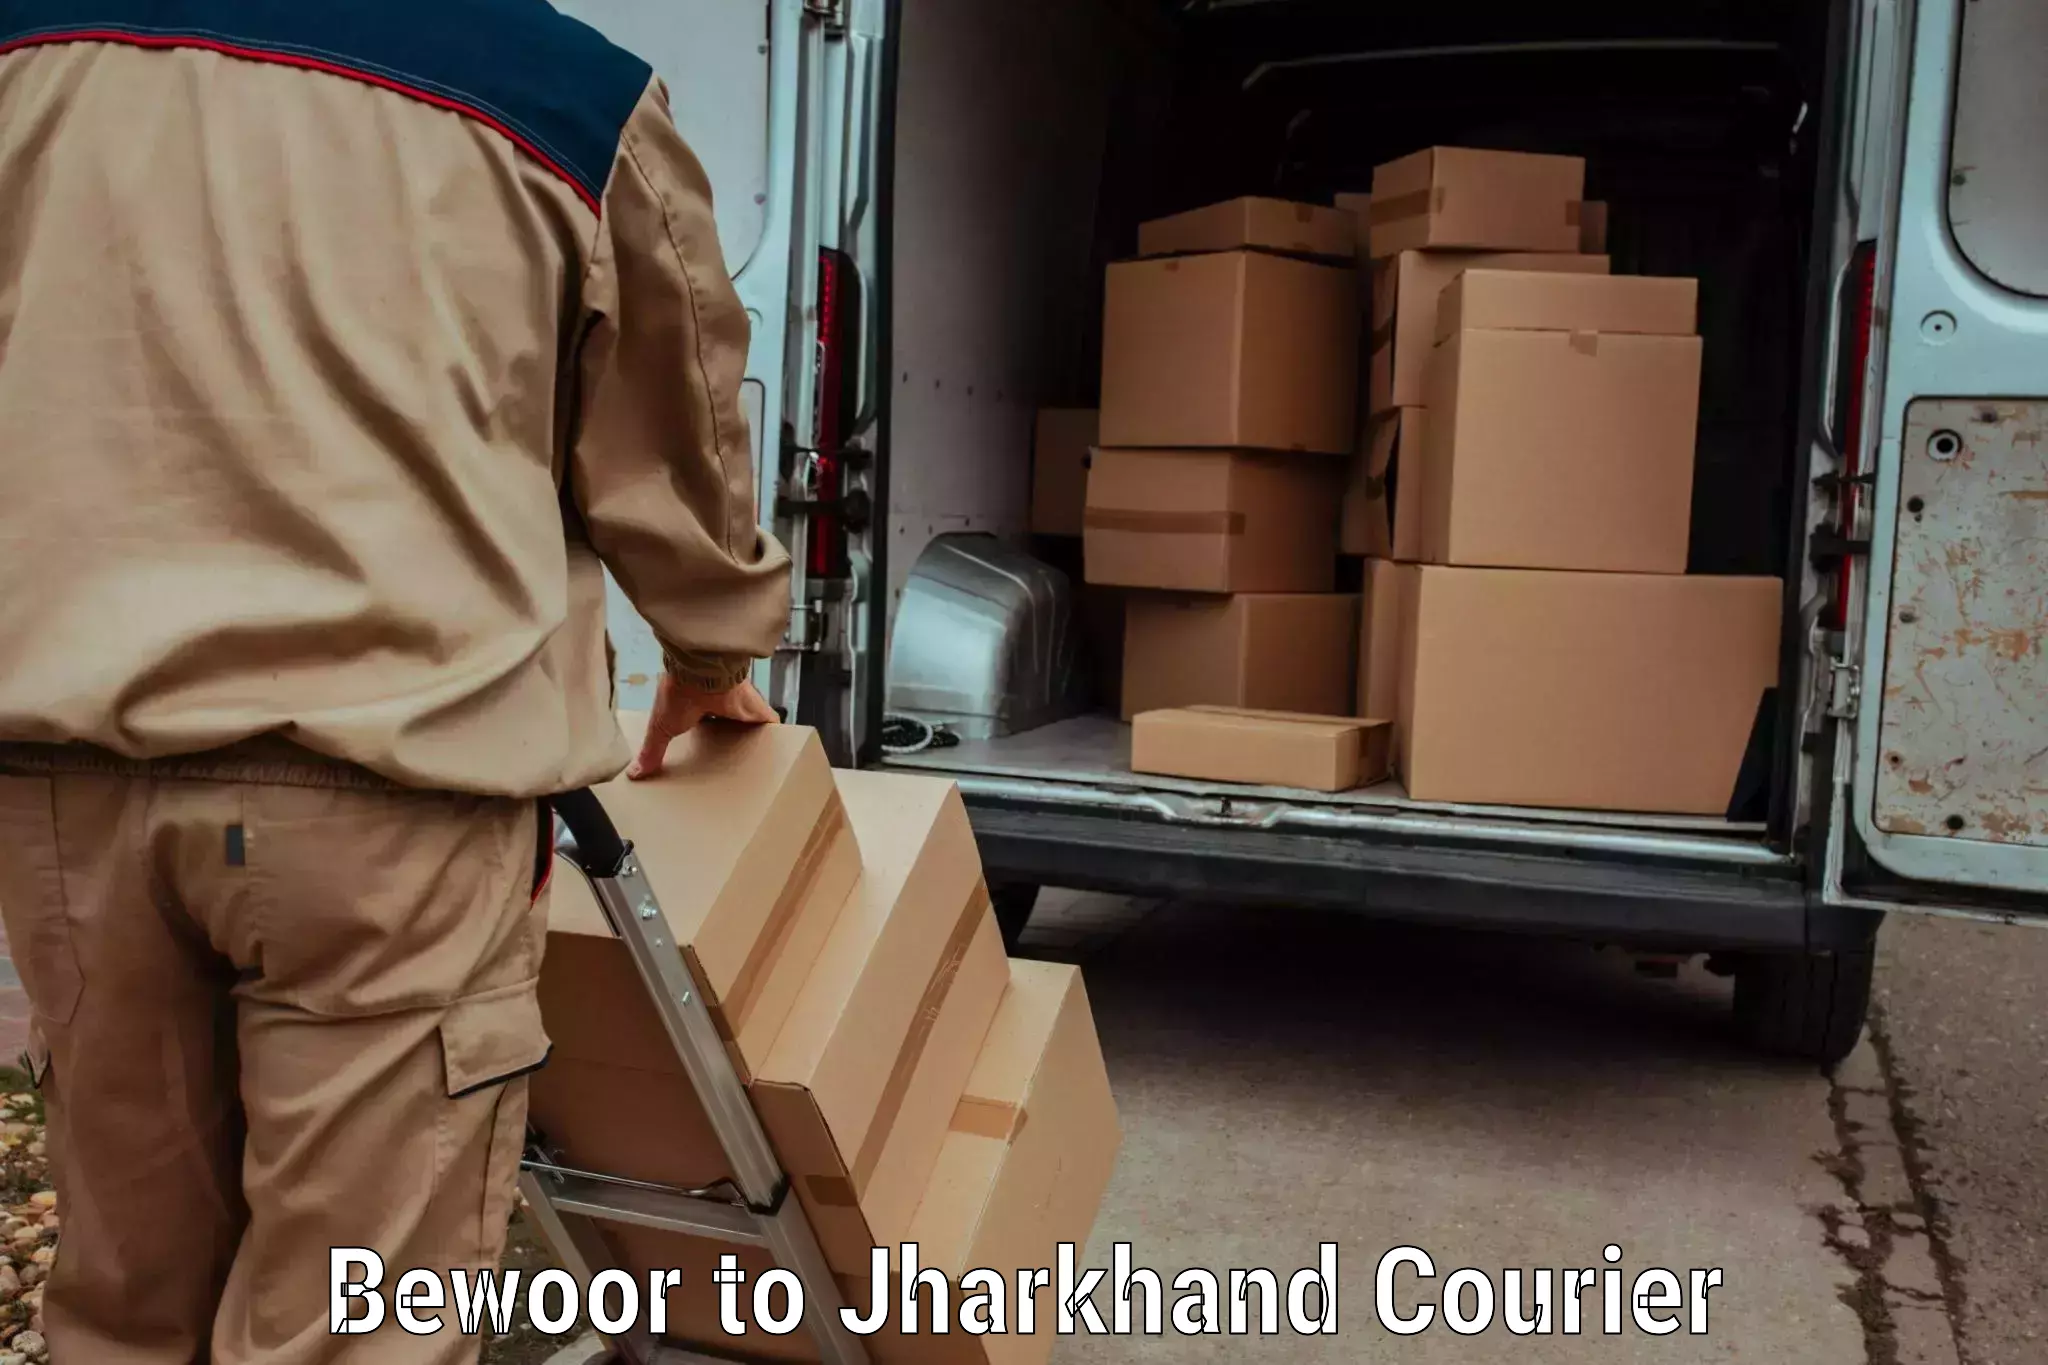 Reliable parcel services in Bewoor to Latehar